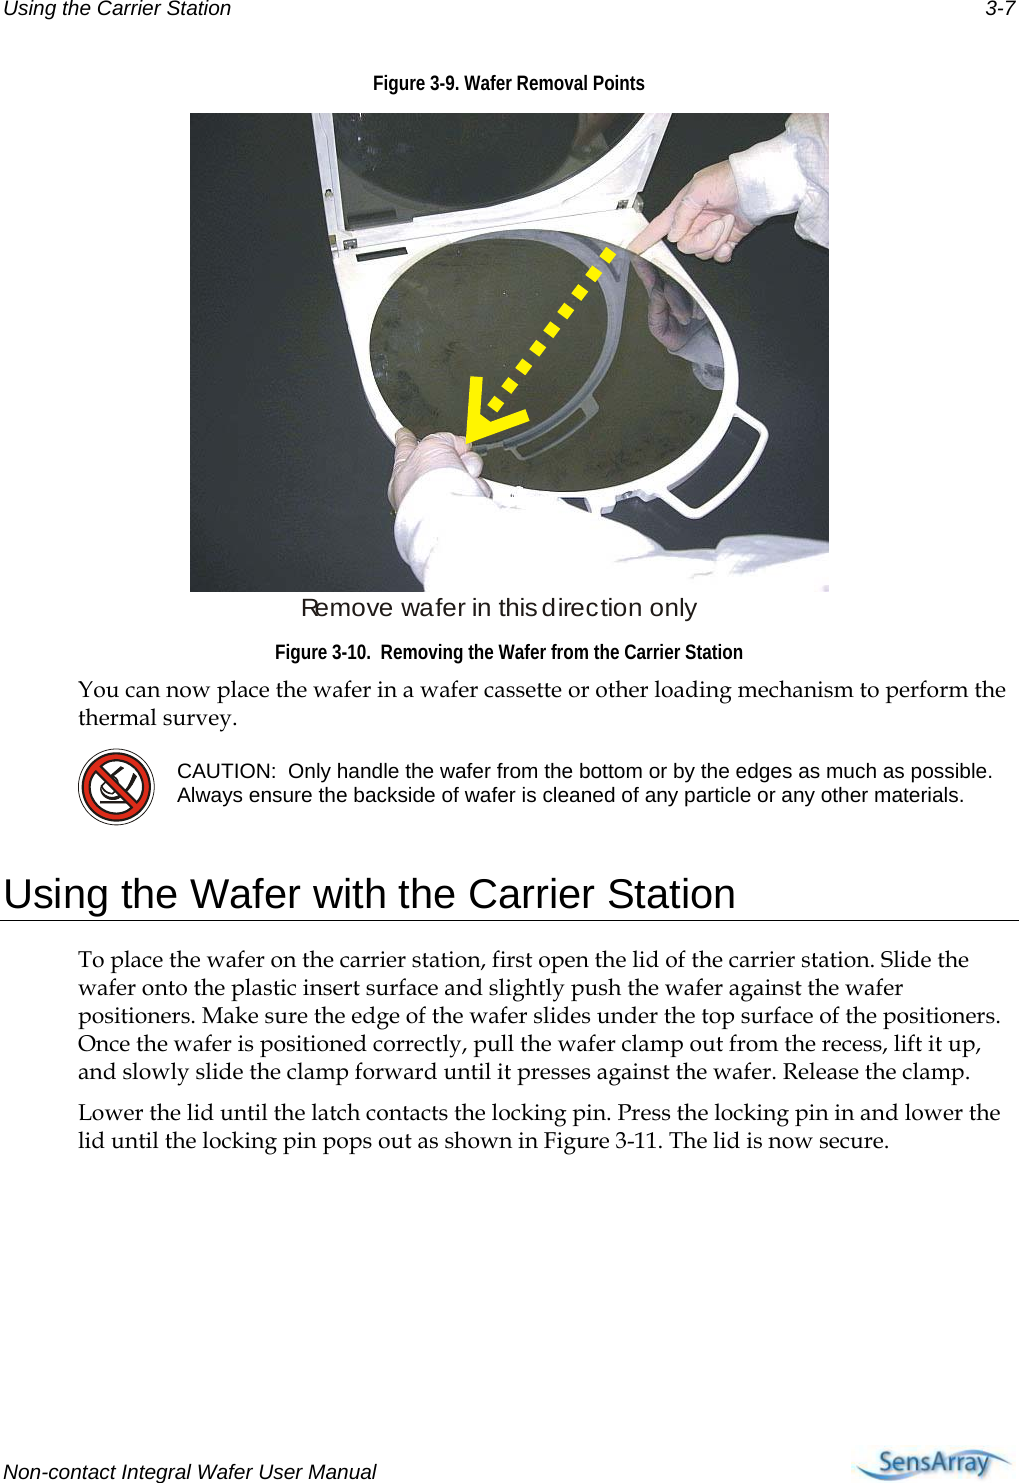 Using the Carrier Station  3-7 Figure 3-9. Wafer Removal Points Remove wafer in this direction only Figure 3-10.  Removing the Wafer from the Carrier Station You can now place the wafer in a wafer cassette or other loading mechanism to perform the thermal survey.  CAUTION:  Only handle the wafer from the bottom or by the edges as much as possible.  Always ensure the backside of wafer is cleaned of any particle or any other materials.   Using the Wafer with the Carrier Station To place the wafer on the carrier station, first open the lid of the carrier station. Slide the wafer onto the plastic insert surface and slightly push the wafer against the wafer positioners. Make sure the edge of the wafer slides under the top surface of the positioners. Once the wafer is positioned correctly, pull the wafer clamp out from the recess, lift it up, and slowly slide the clamp forward until it presses against the wafer. Release the clamp. Lower the lid until the latch contacts the locking pin. Press the locking pin in and lower the lid until the locking pin pops out as shown in Figure 3-11. The lid is now secure.  Non-contact Integral Wafer User Manual      